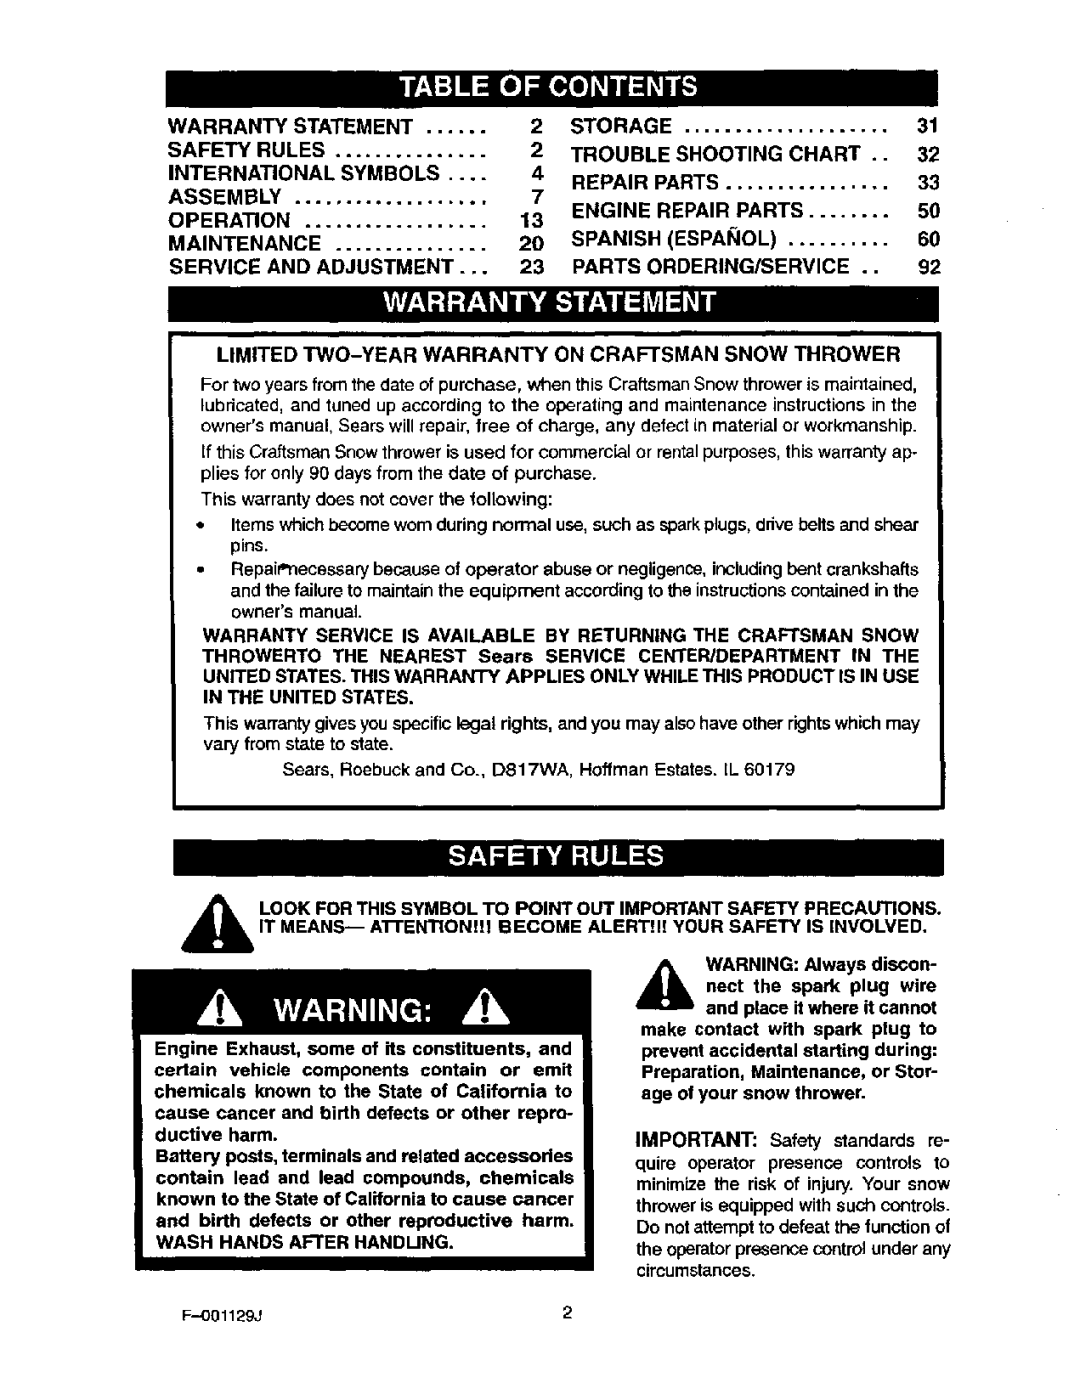 Craftsman 536.88112 operating instructions Limited TWO-YEAR Warranty on Craftsman Snow Thrower, Wash Hands After Handling 